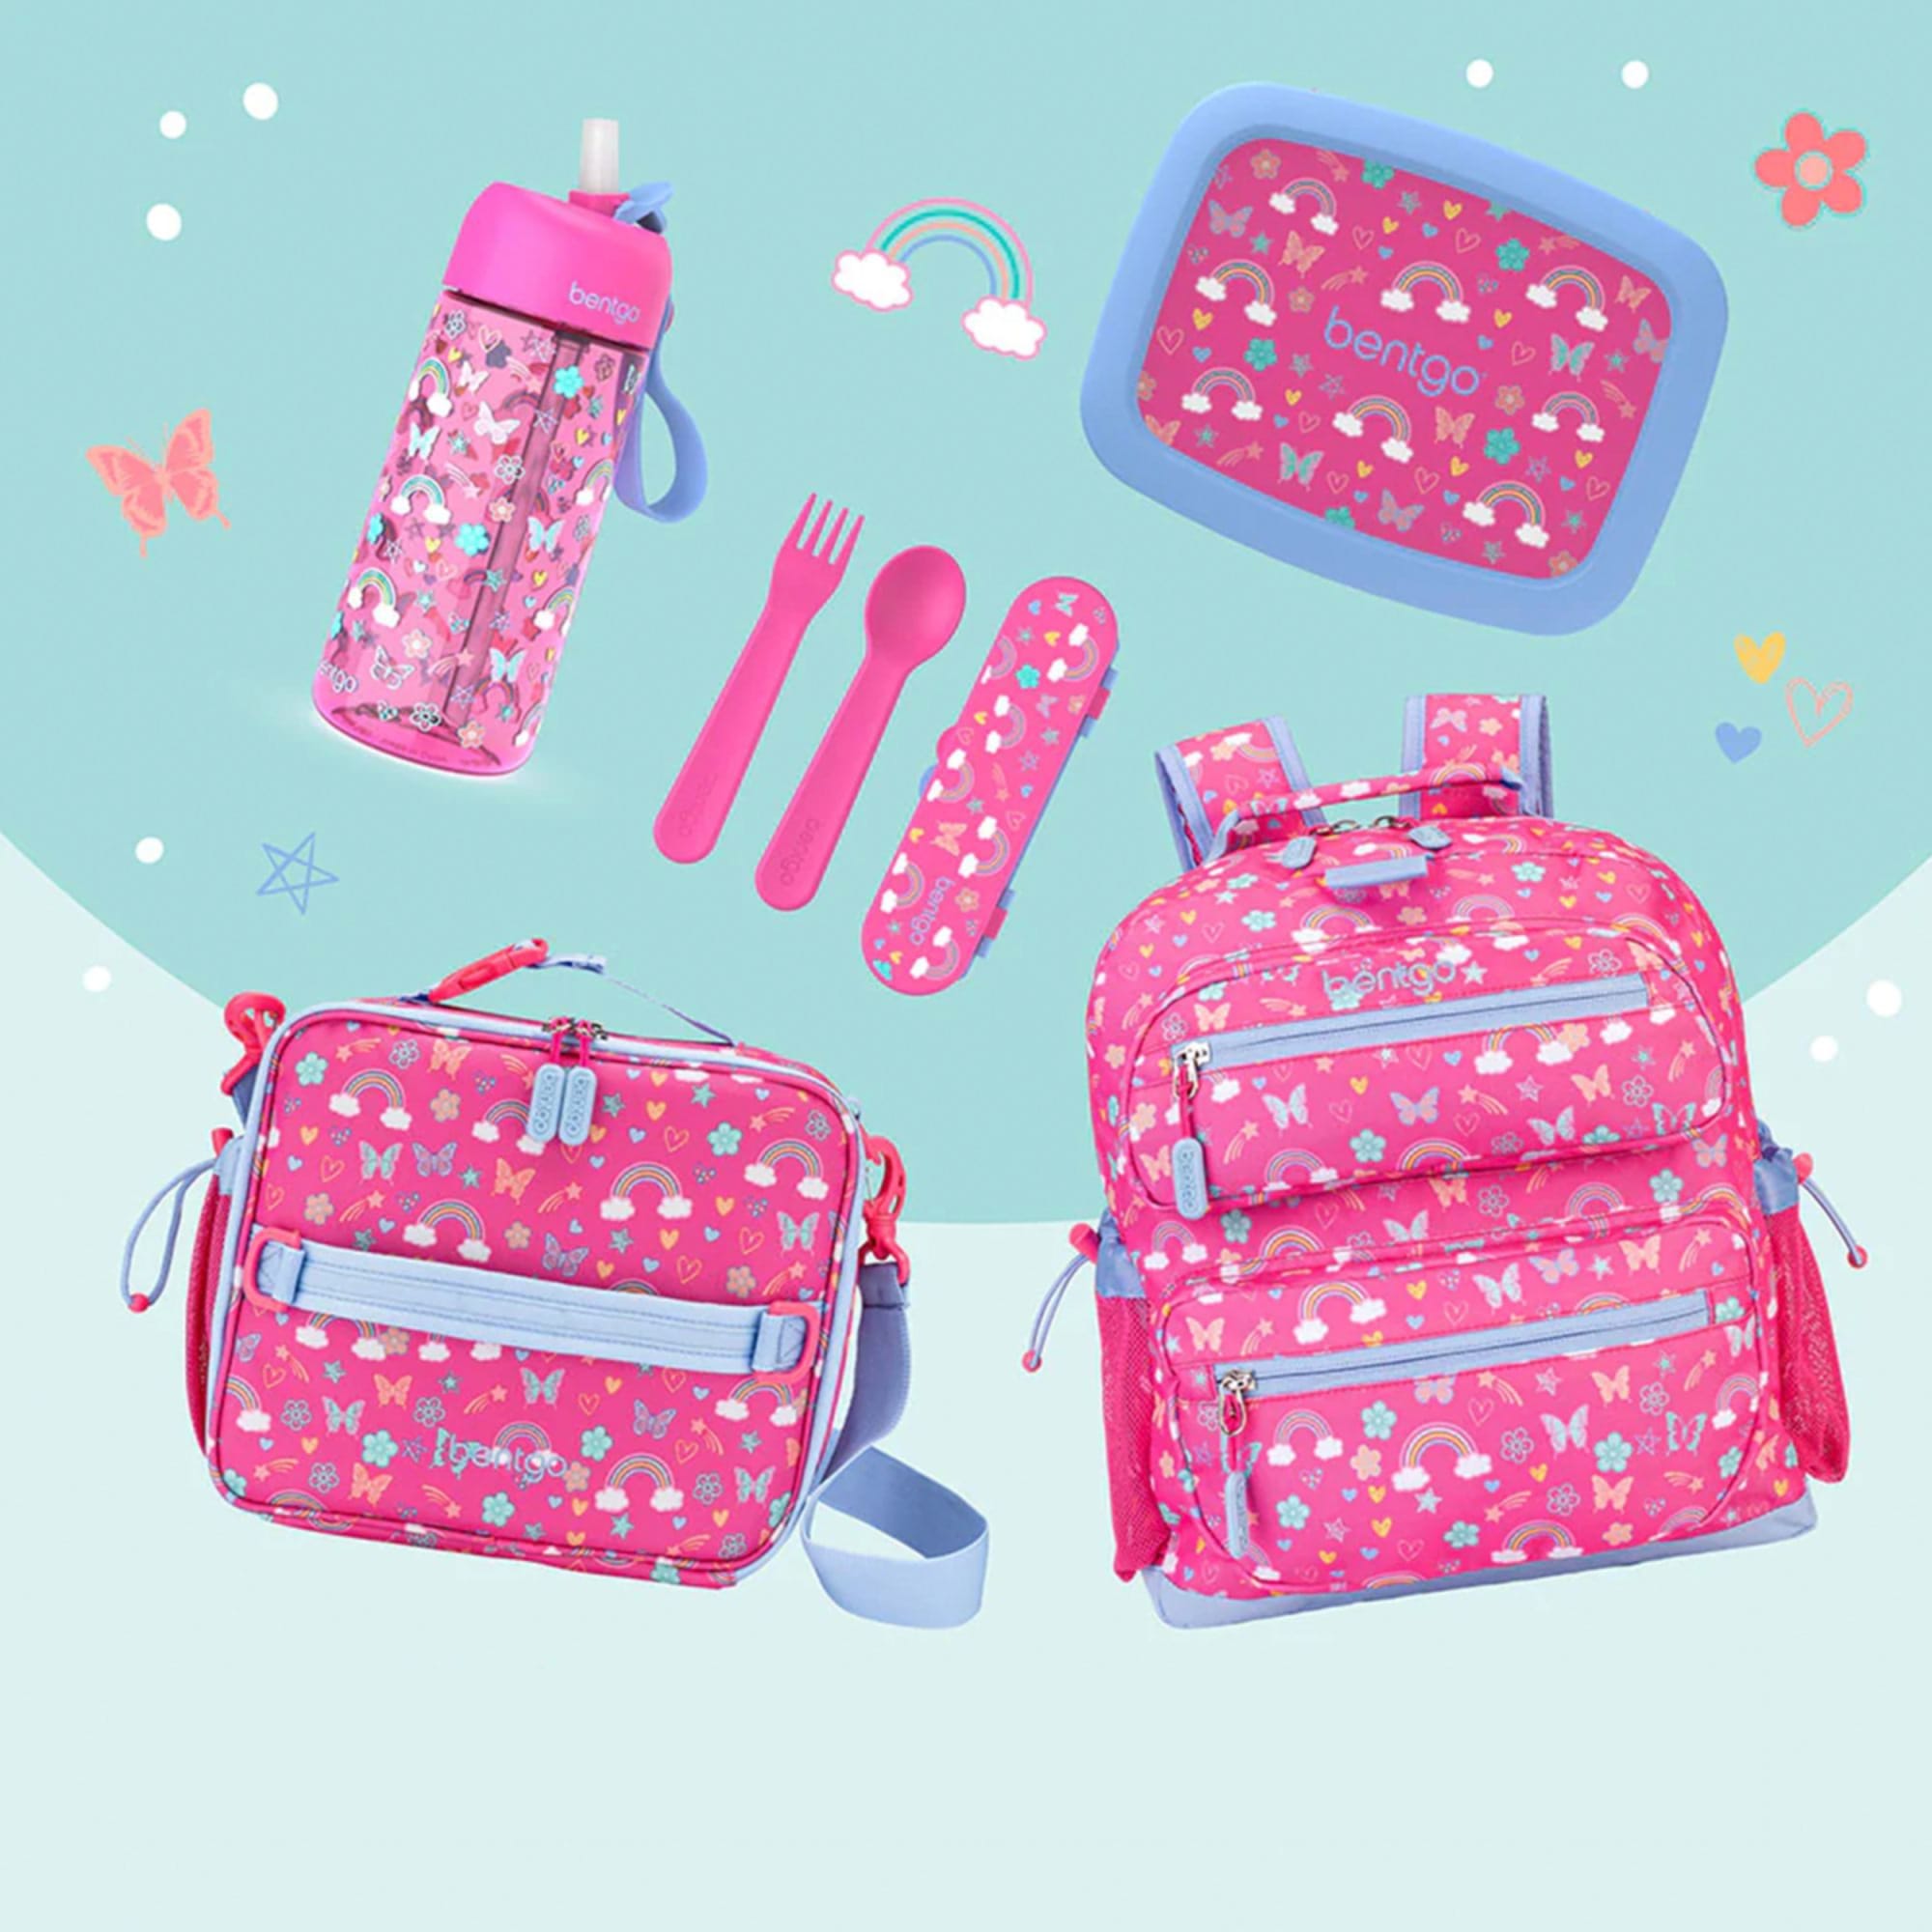 Up To 47% Off on Bentgo Kids Leak-Proof Lunch Box